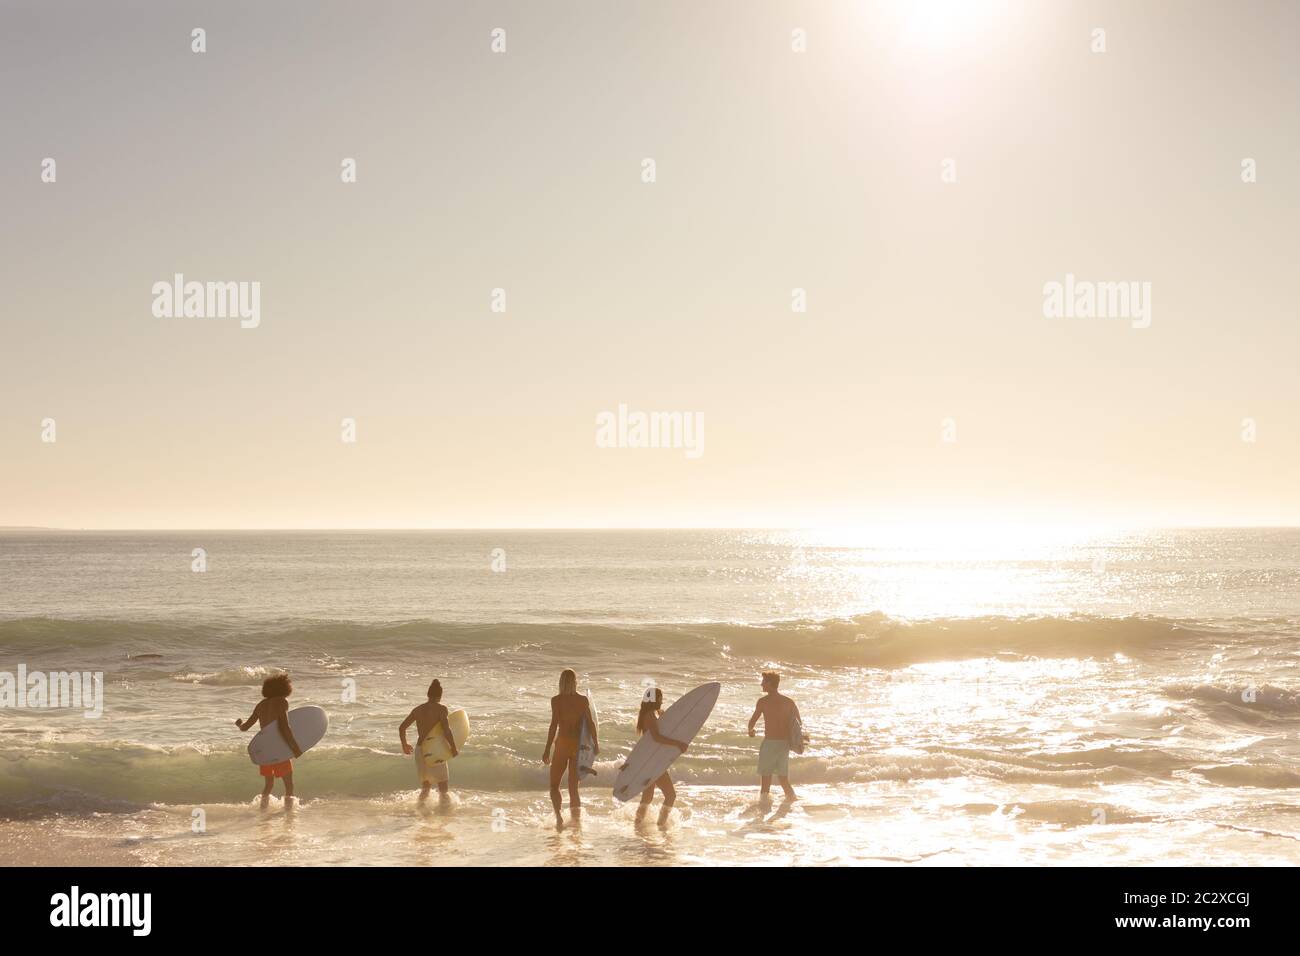 Multi-ethnic group of male and female, surfing on the beach Stock Photo